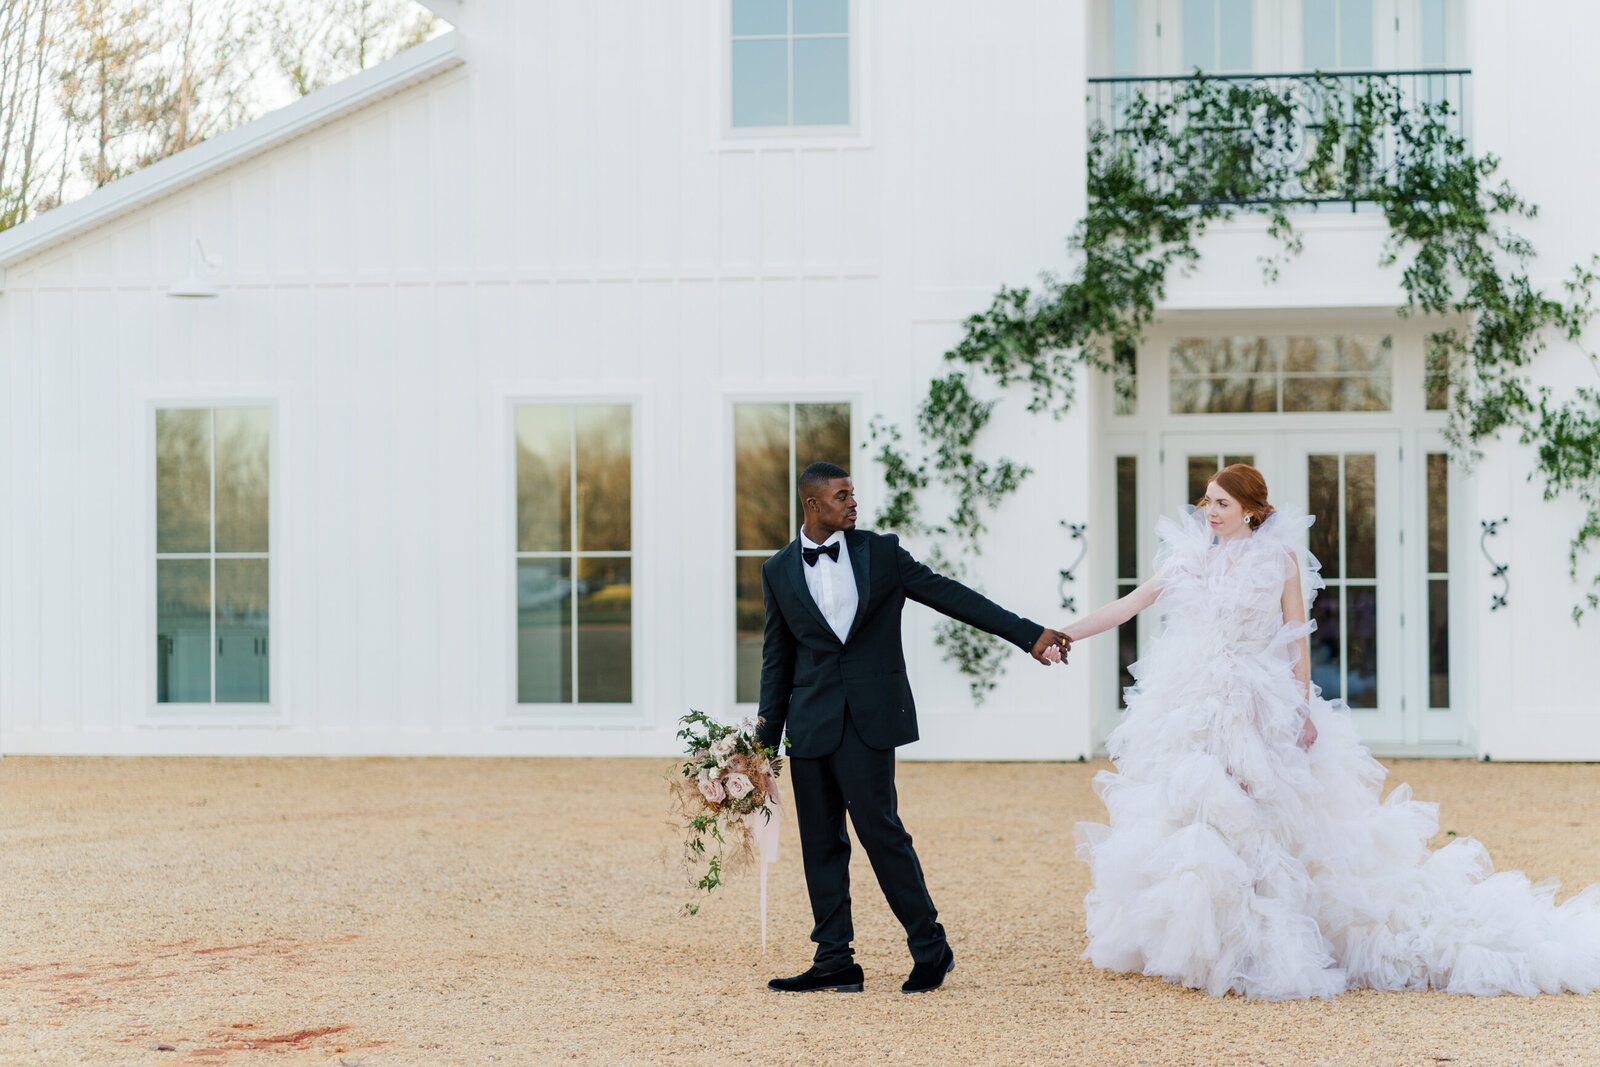 Dramatic portrait from styled shoot at Ivy Rose barn wedding venue in Virginia